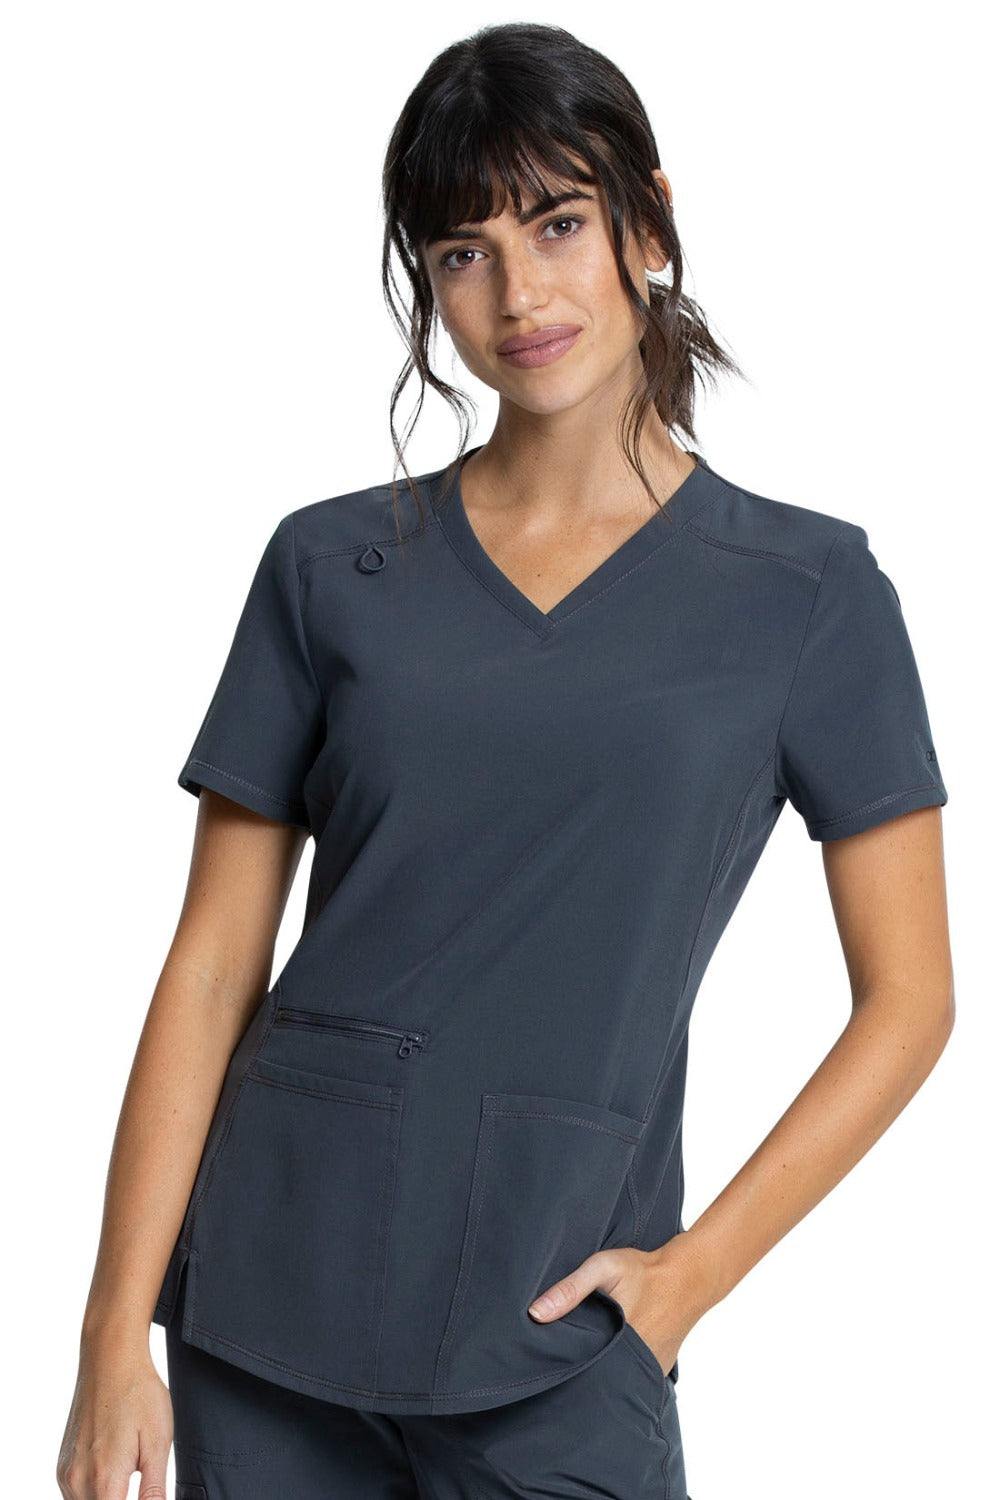 Cherokee Allura V-Neck Scrub Top in Pewter at Parker's Clothing and Shoes.